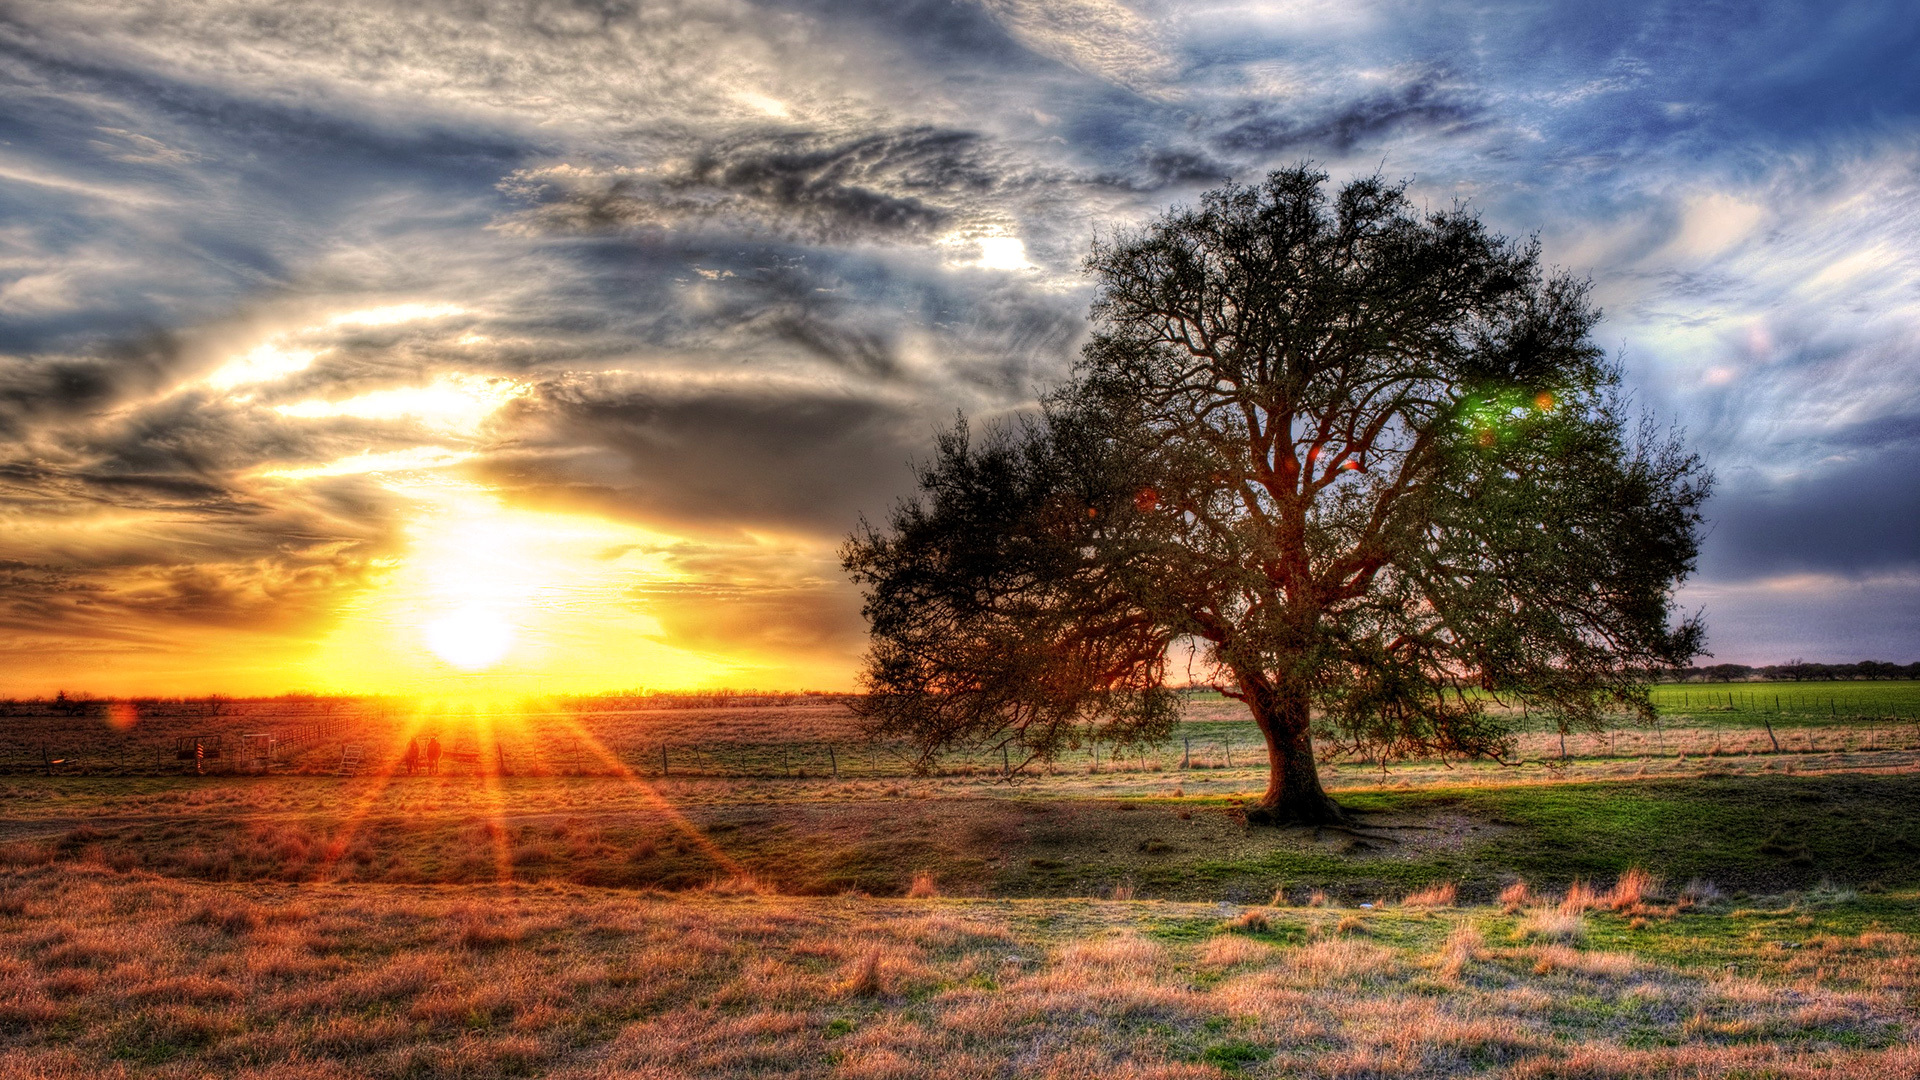 A tree with sunset in the background in hdr